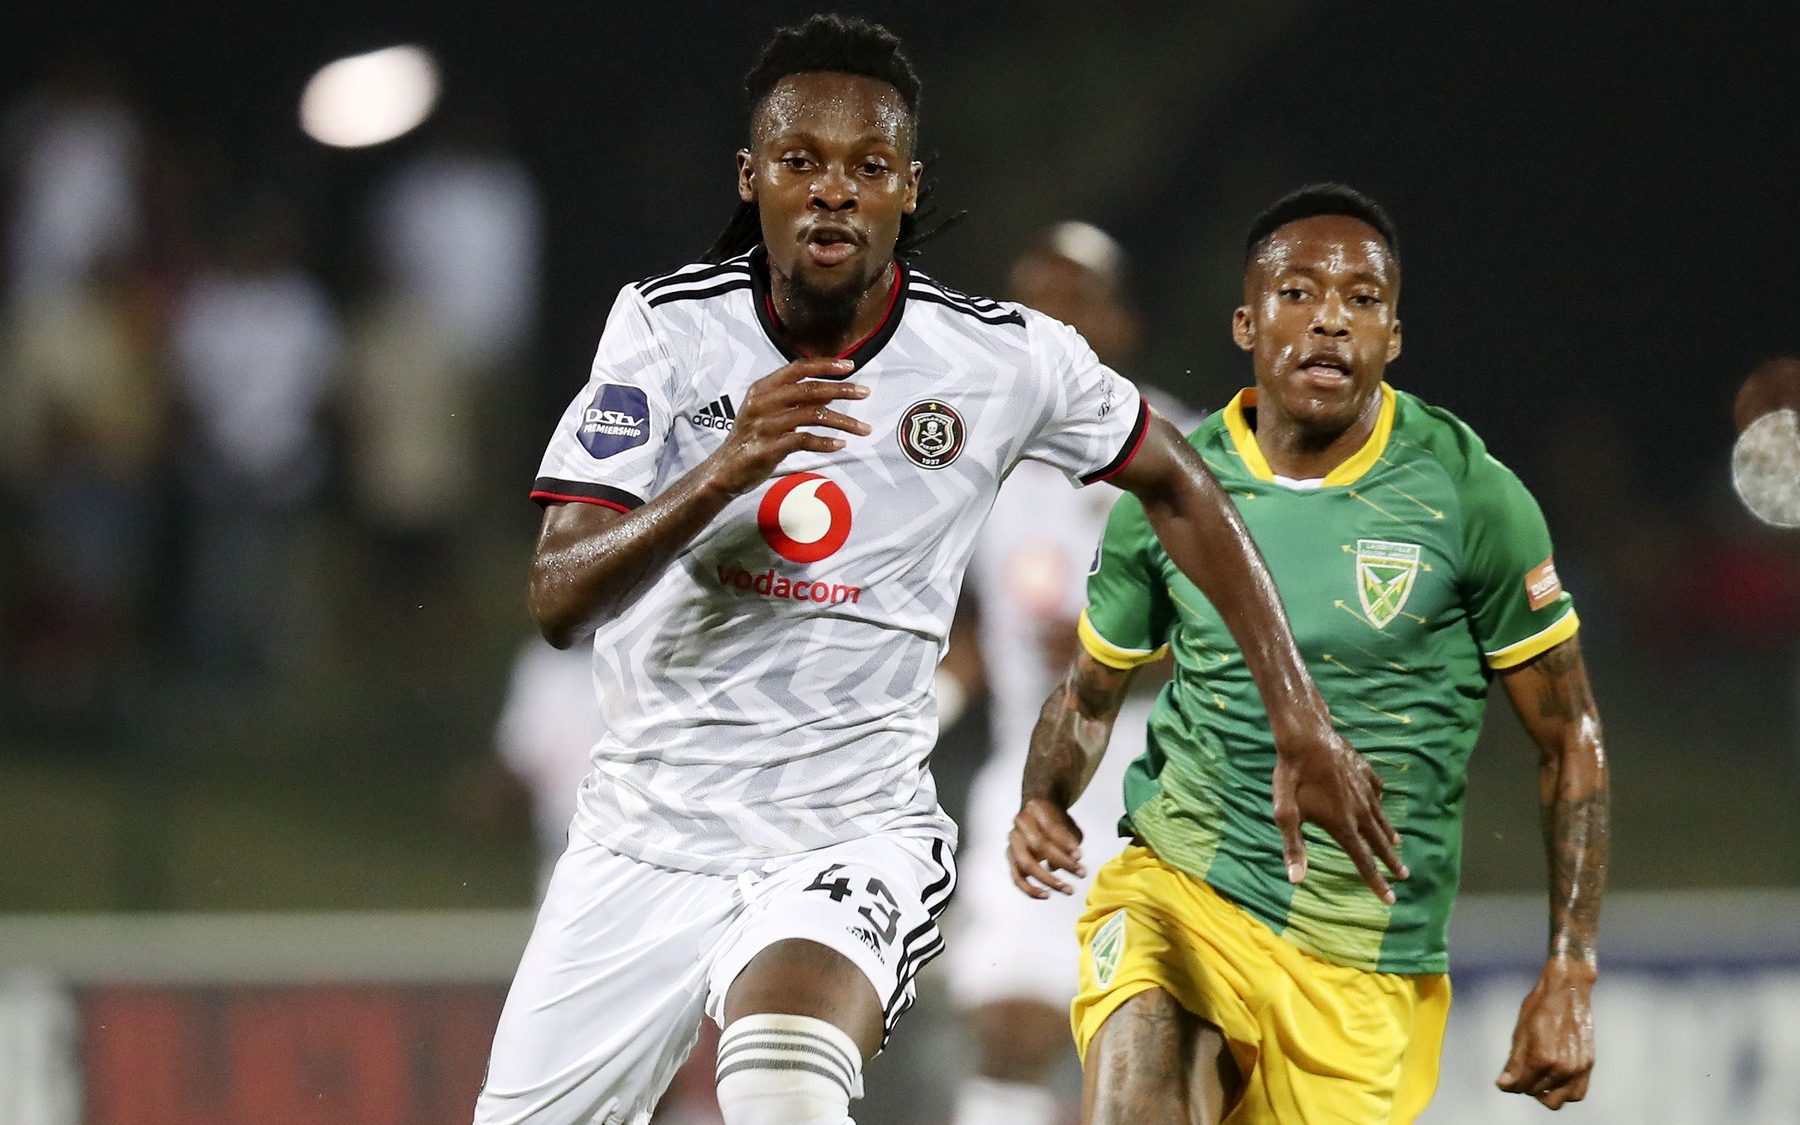 Pirates-defender Ndah and Mmodi of Arrows